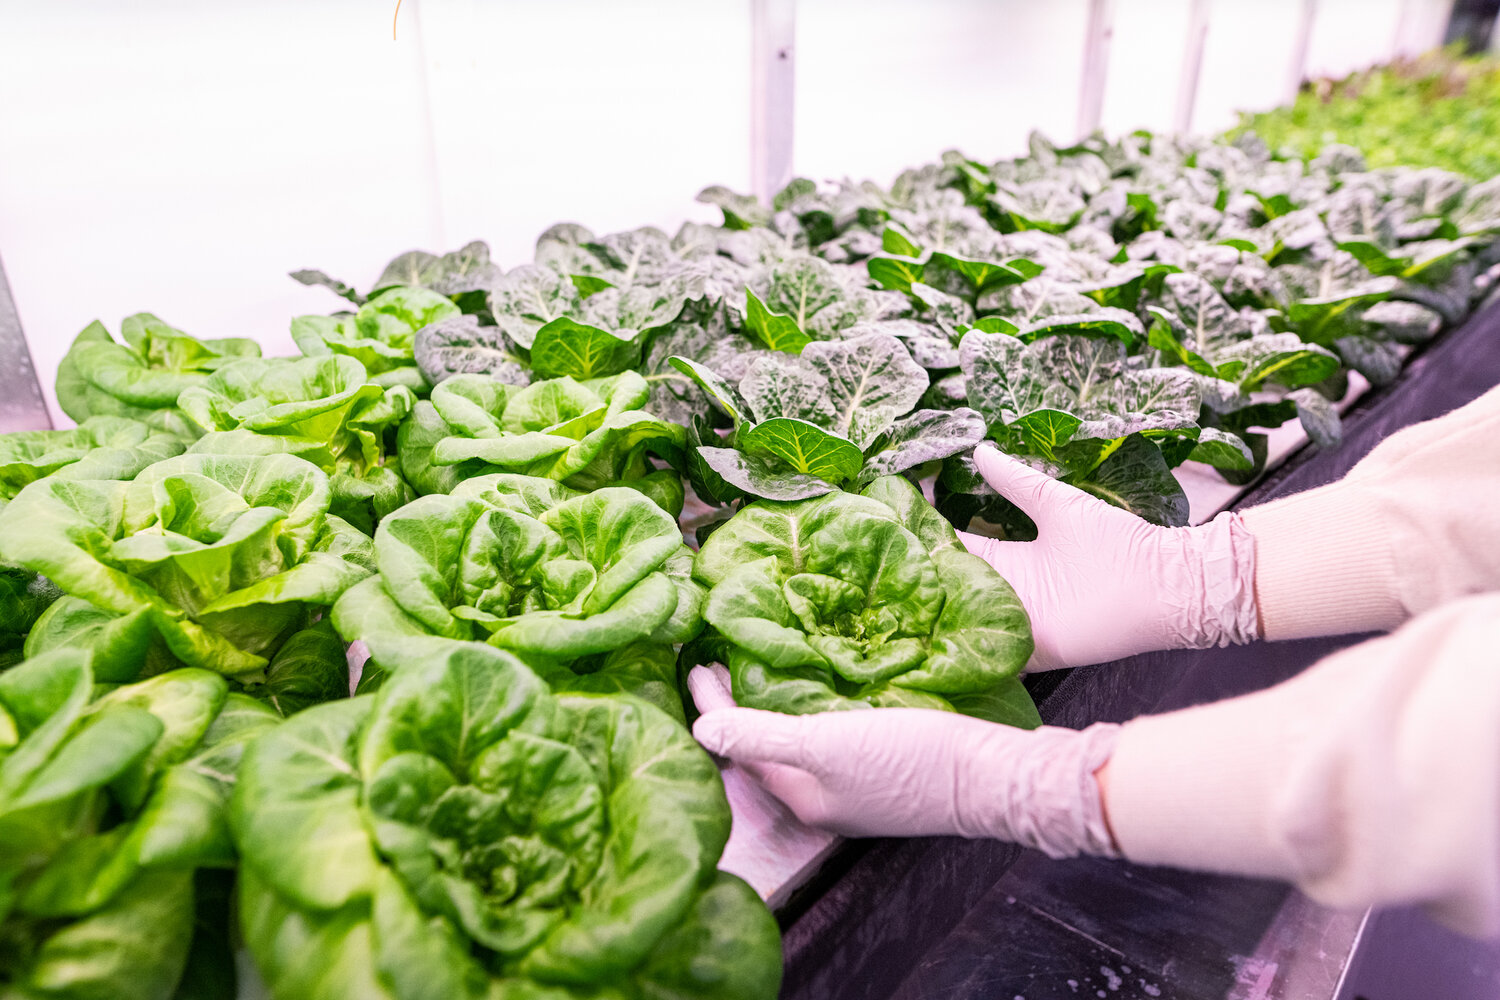 Lettuces, leafy greens (spinach, kale, arugula), Asian greens, herbs, and microgreens are just some of the produce varieties you can grow hydroponically.